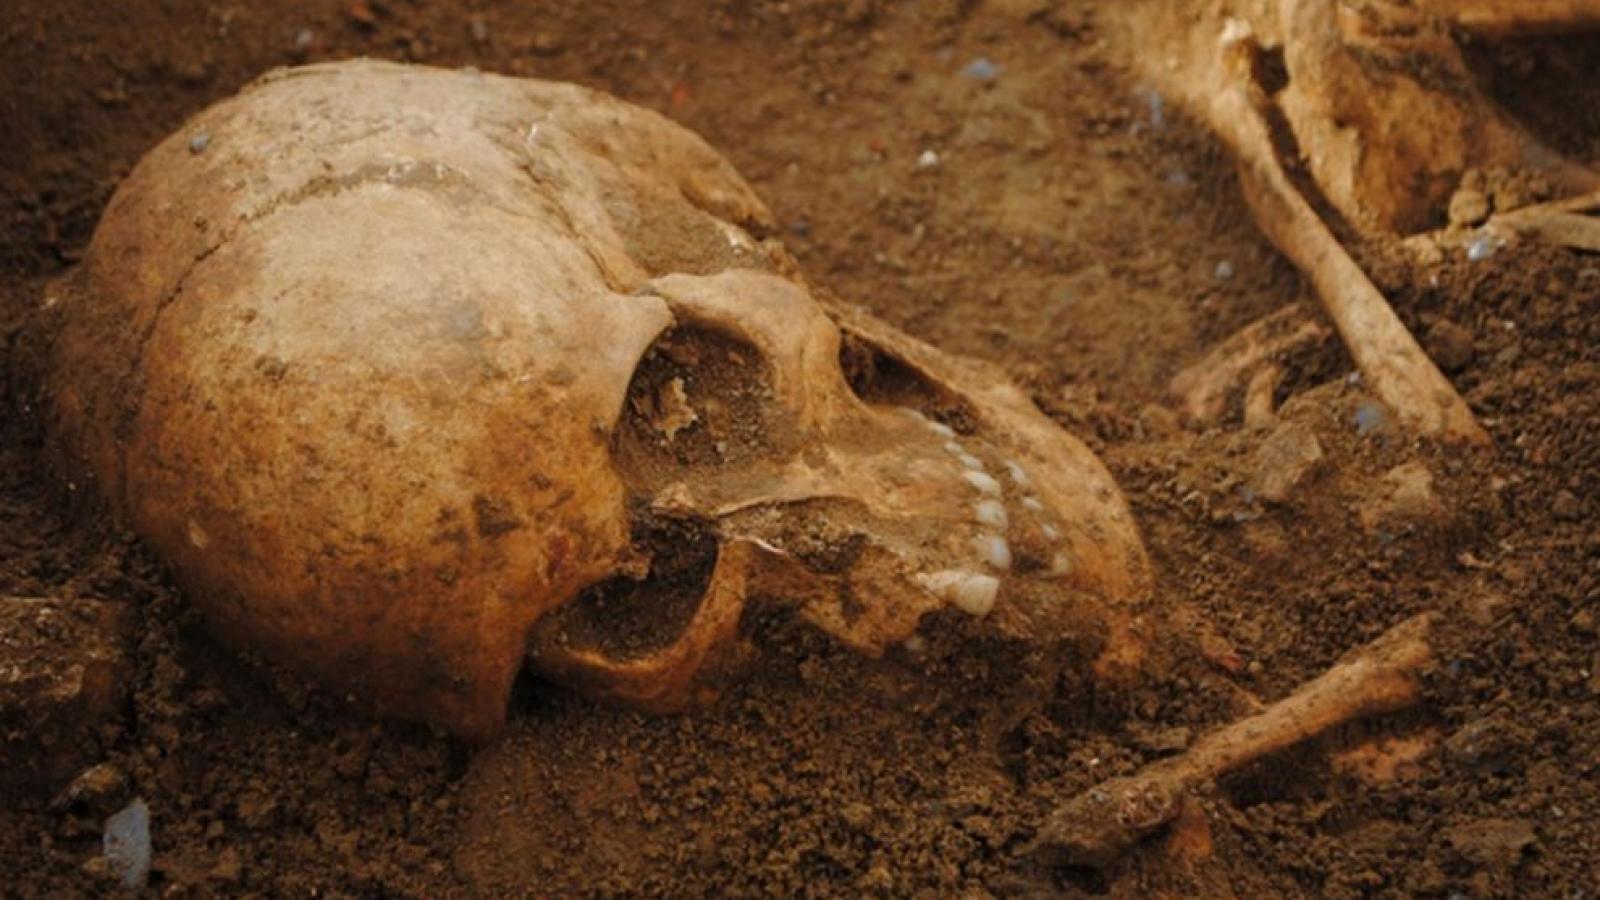 Human burial from a medieval cemetery, Tuscany, Italy